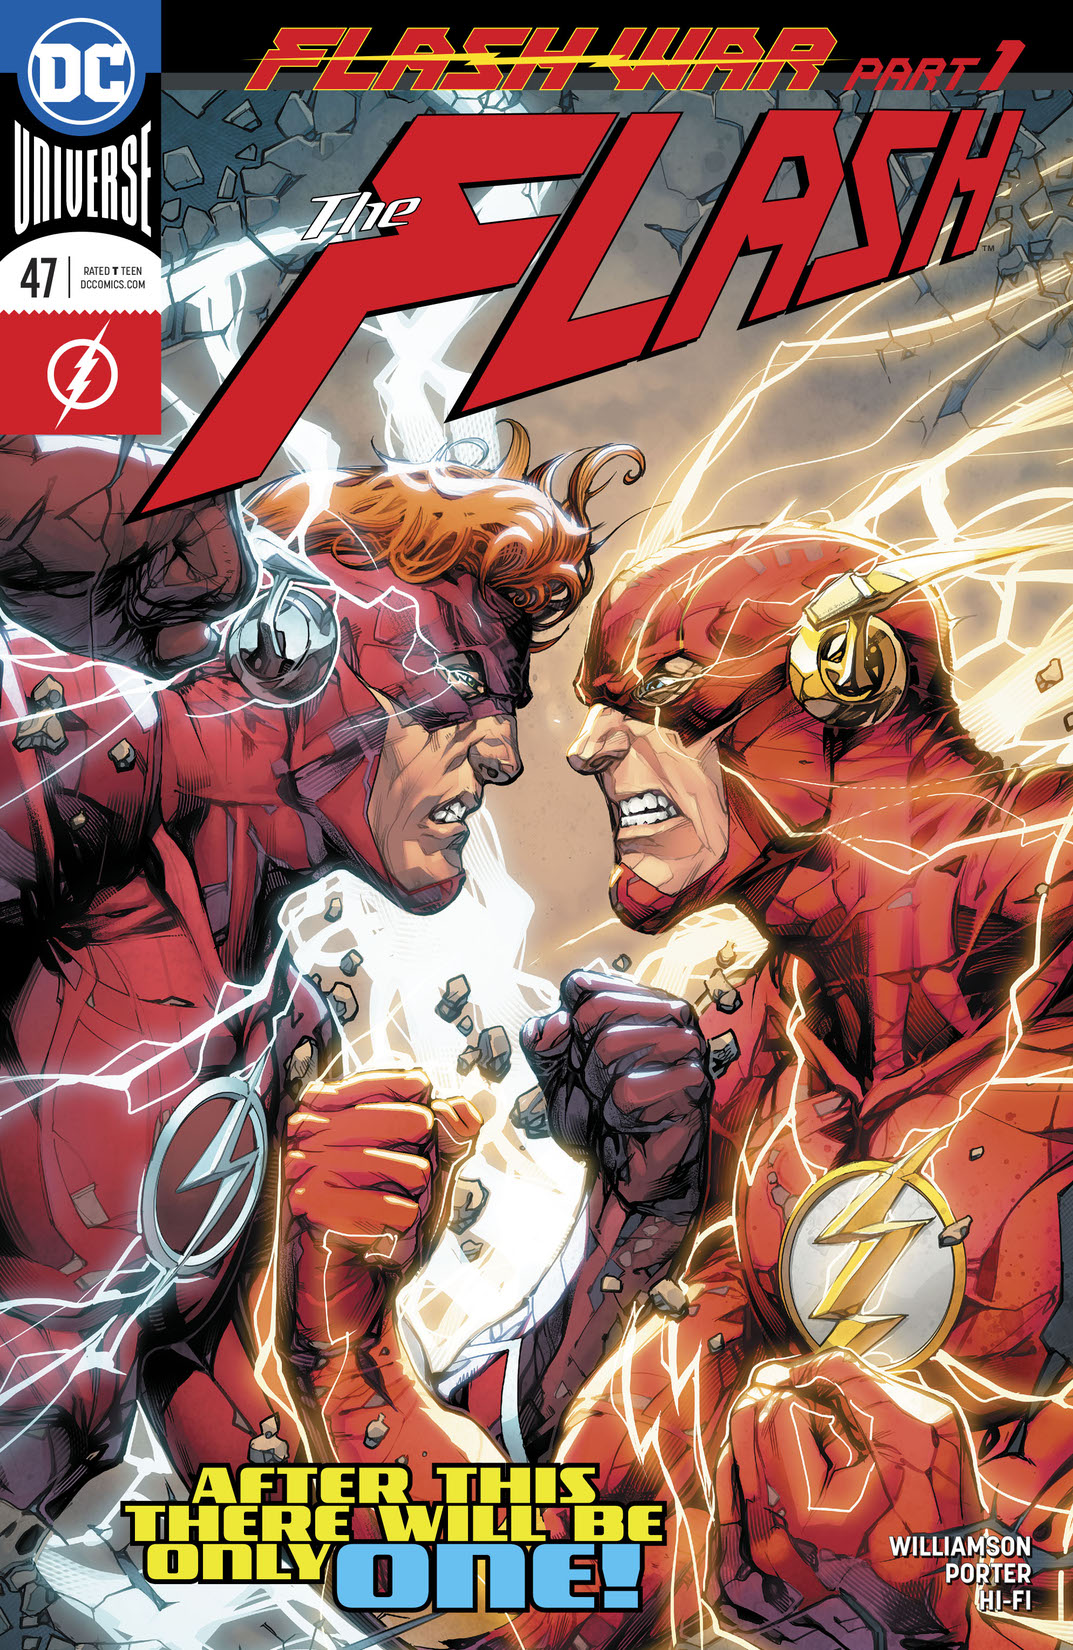 The Flash (2016-) #47 preview images